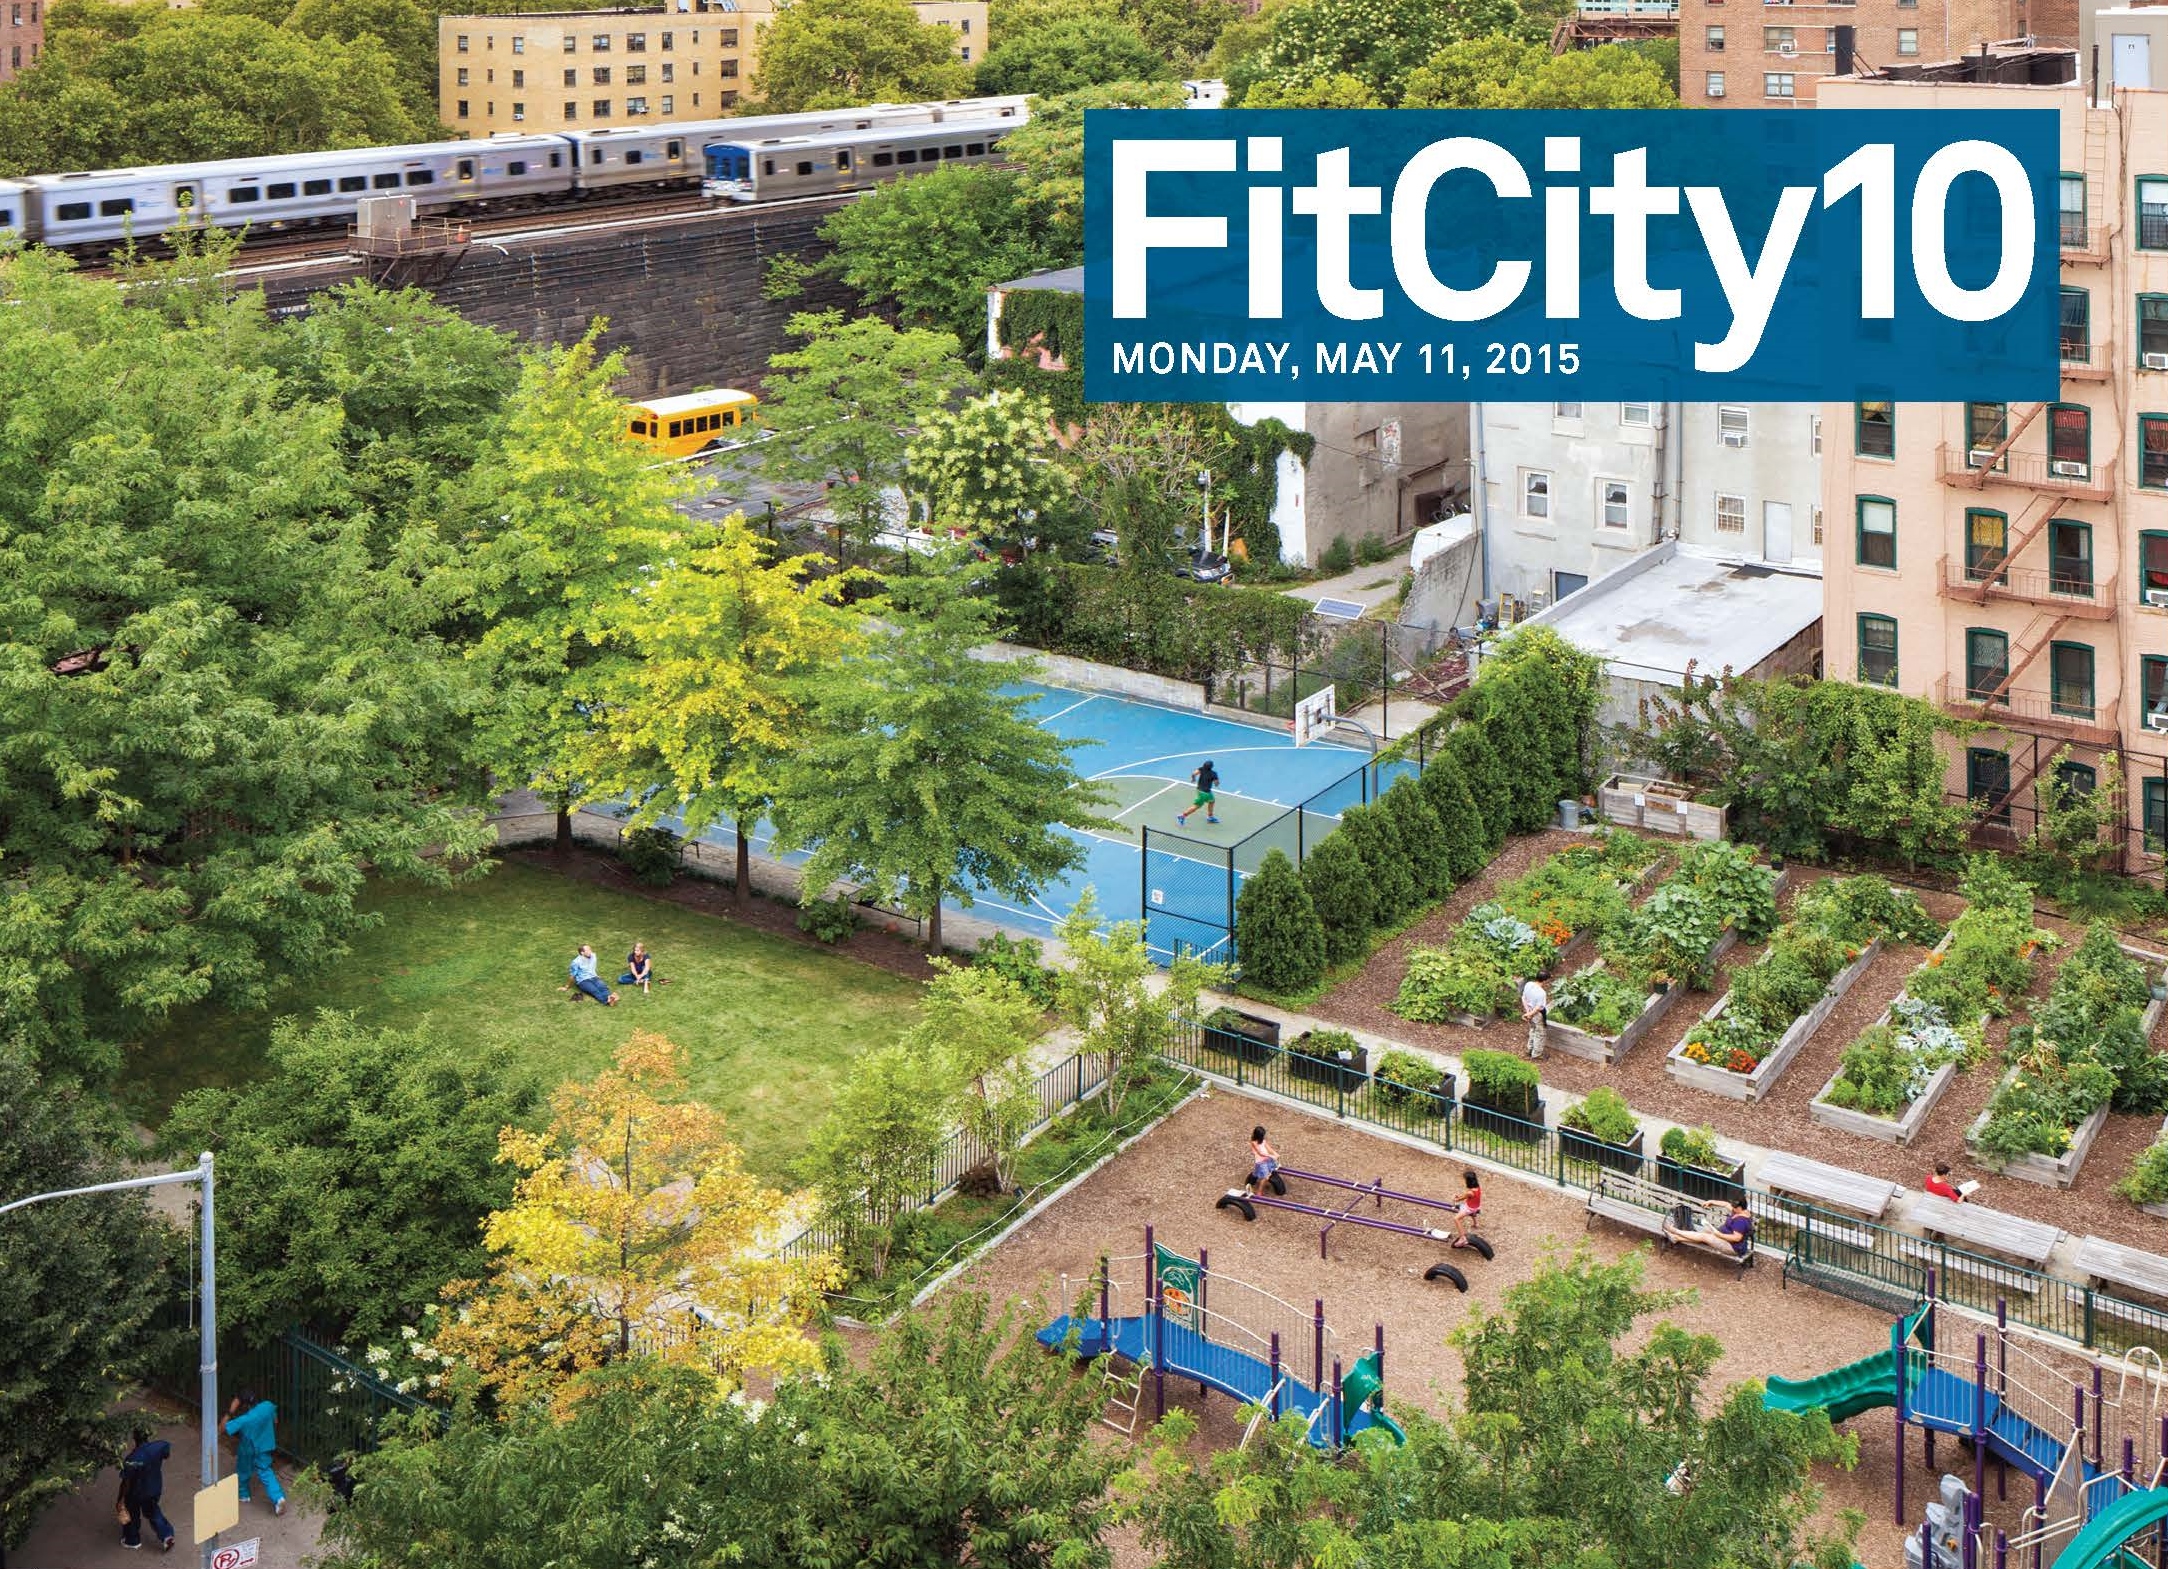 FitCity 10 Report: A Look at the Past and Future of the Active Design Movement